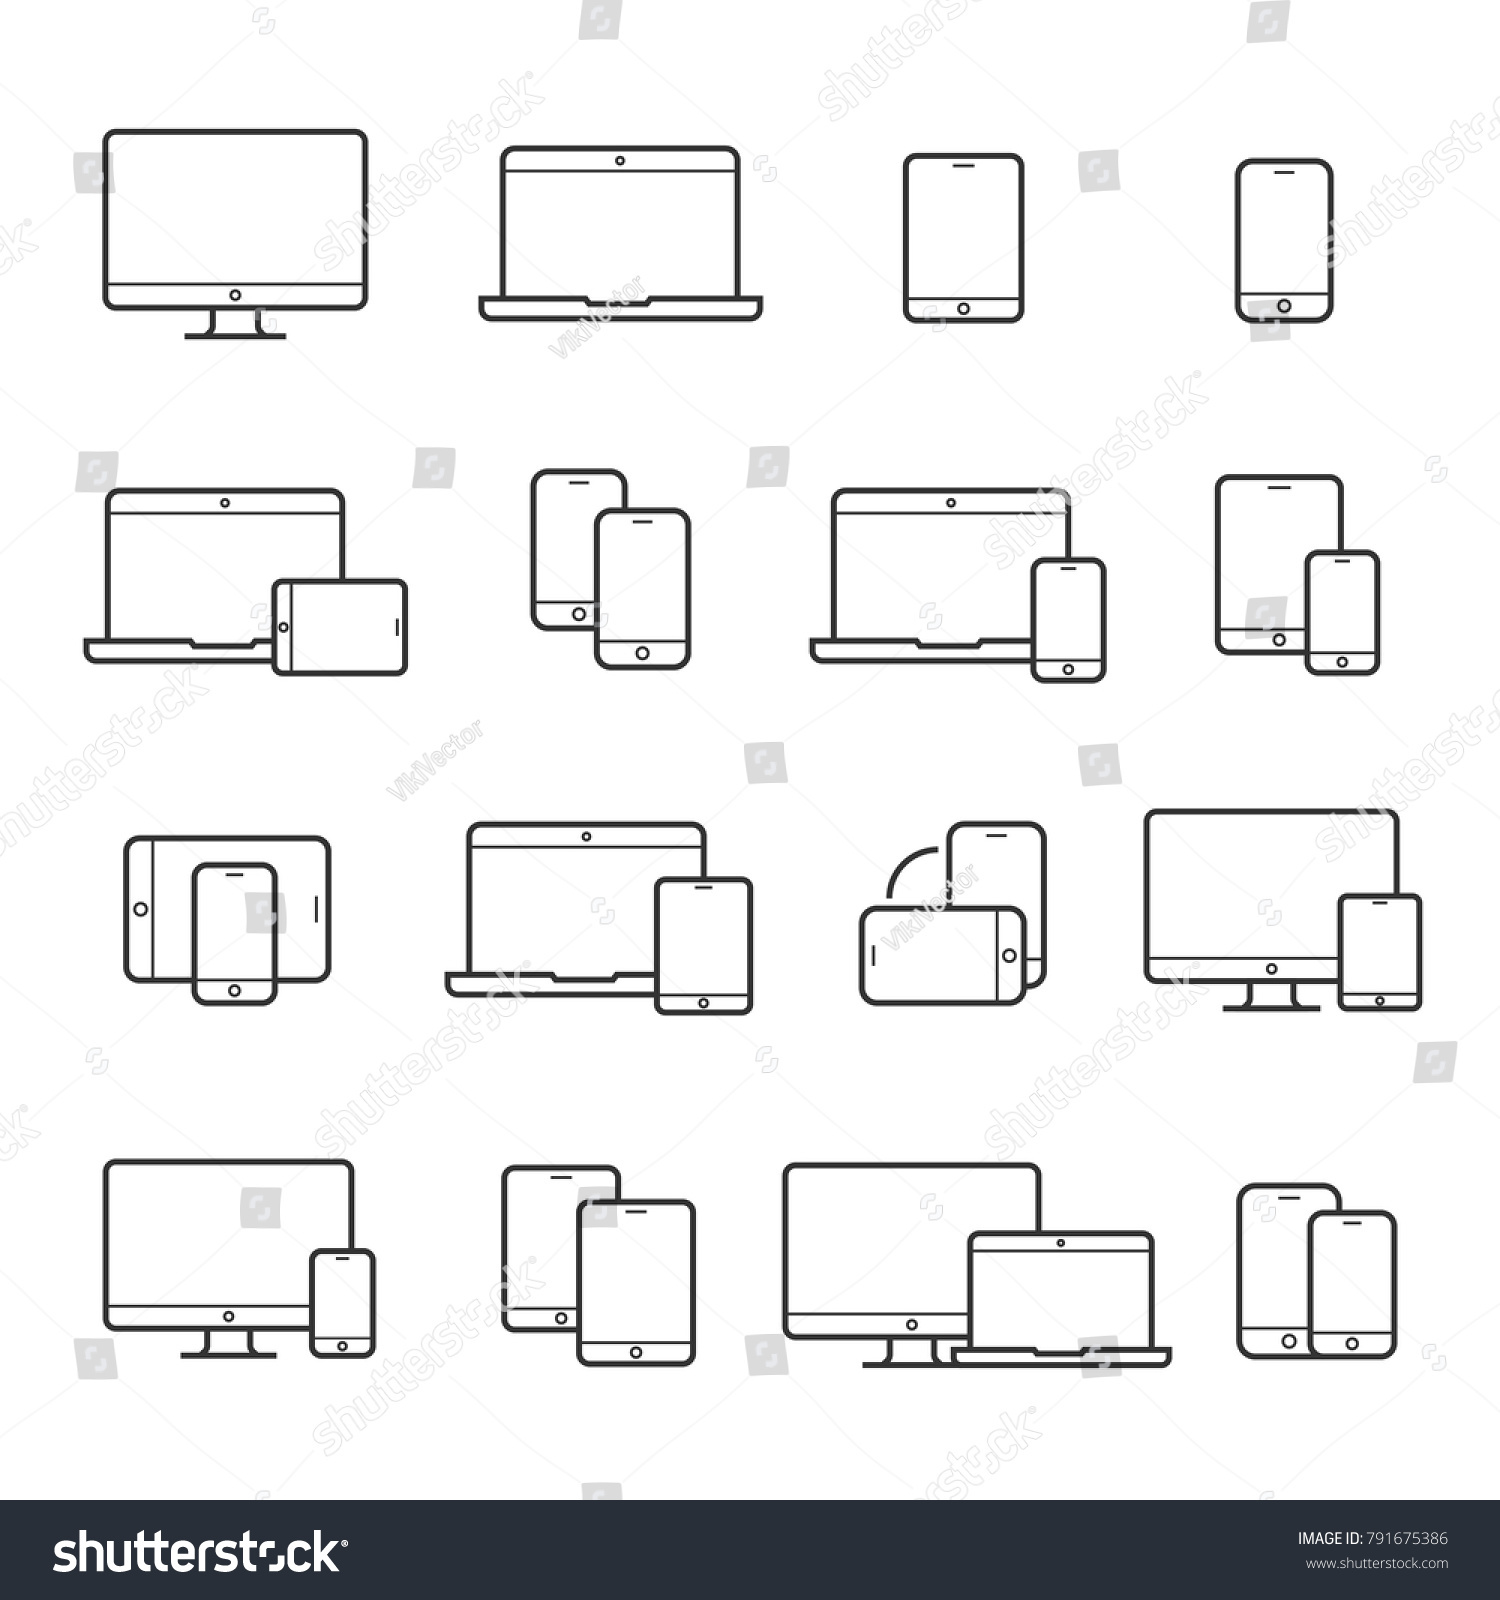 Device line icon set. Portable compact personal computer, smartphone, mobile phone, gadgets for information management, mobile calls, email sending. Vector line art illustration, white background #791675386